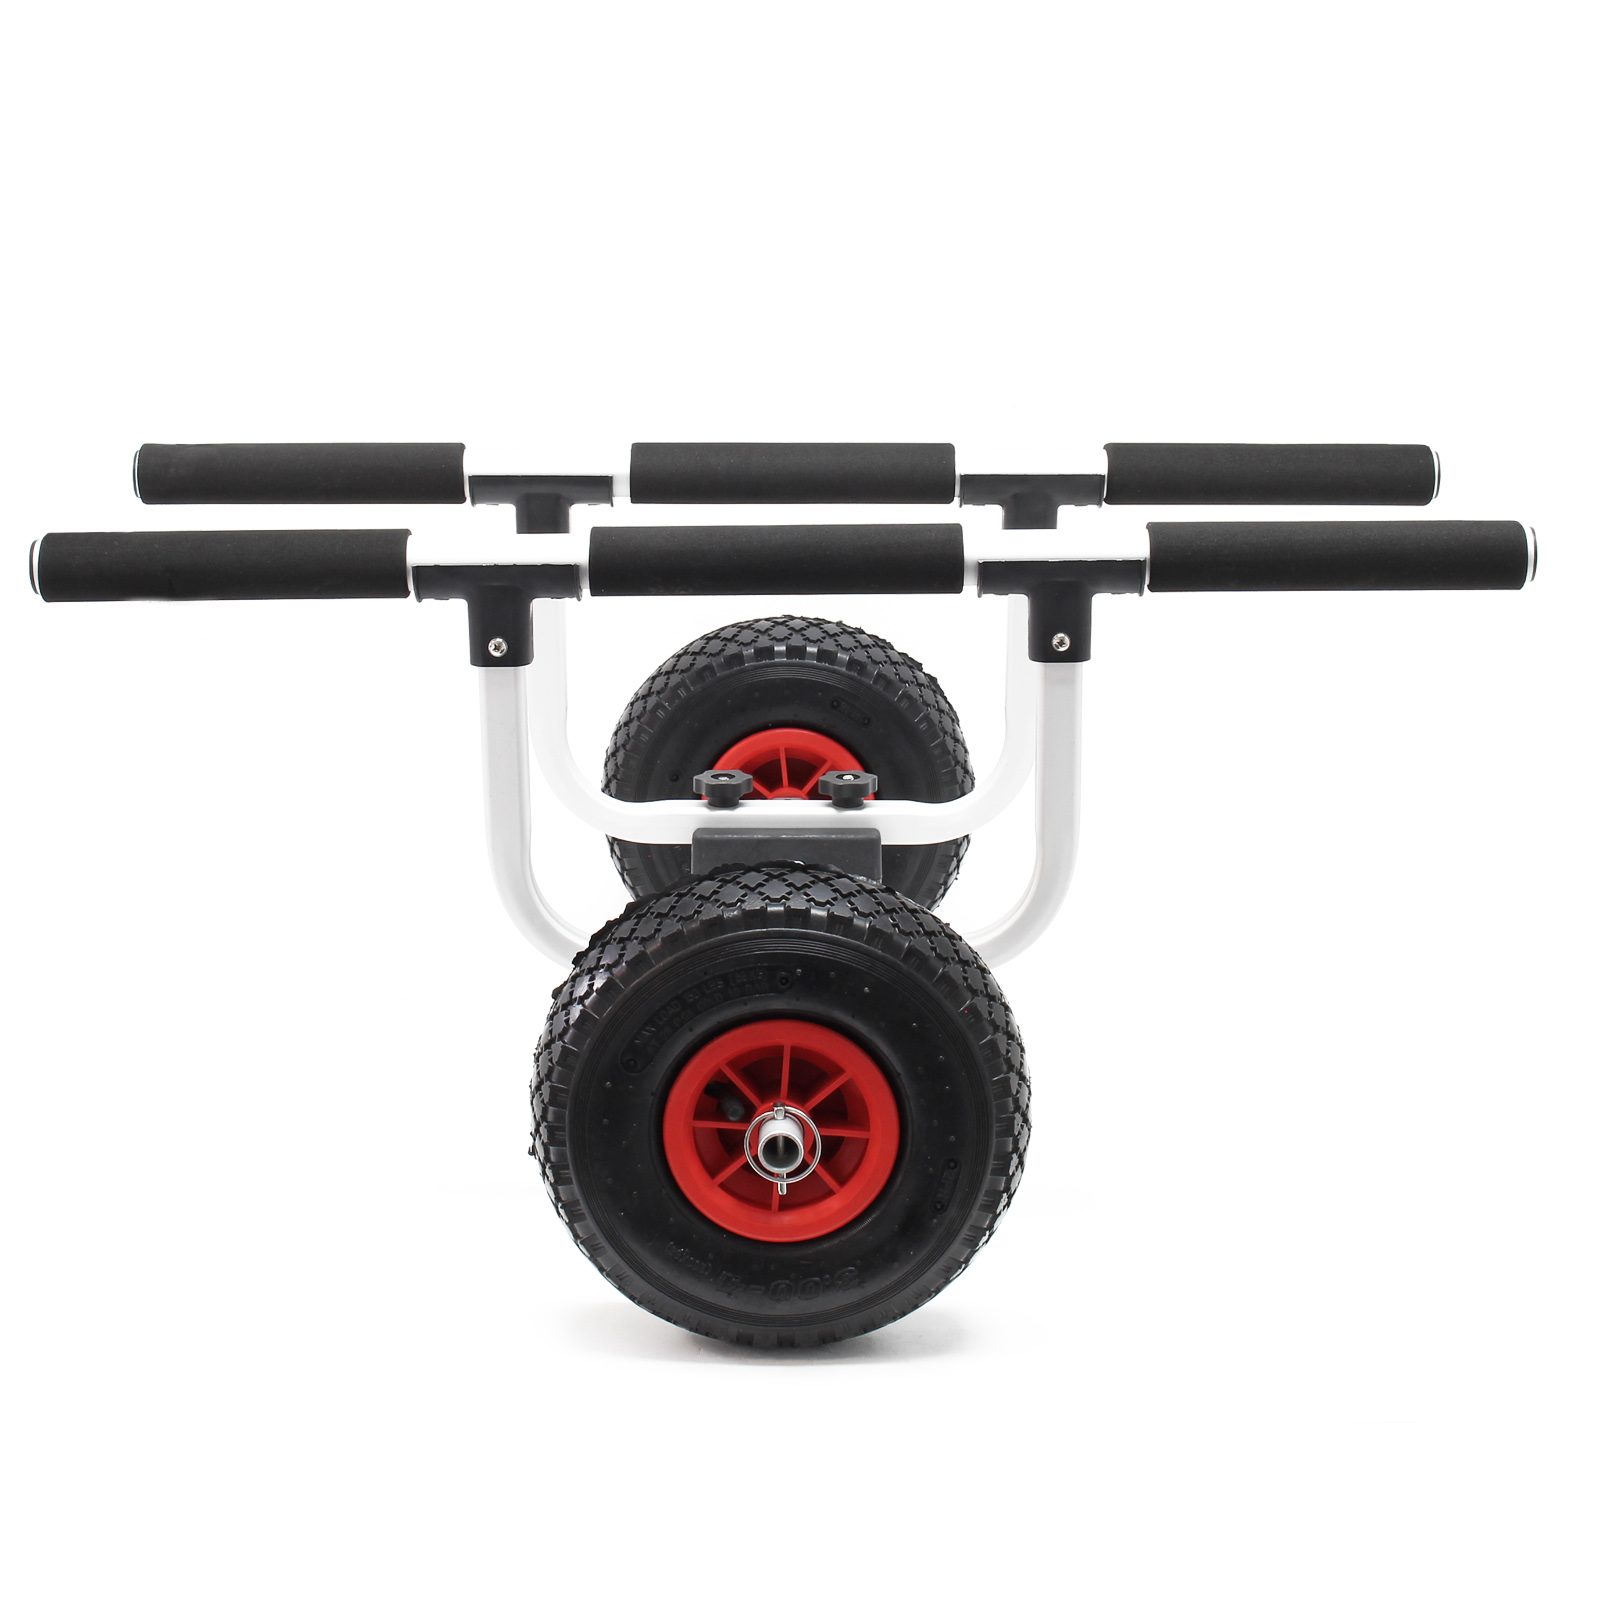 Trolley for kayak with Pneumatic Wheels suprod kw260-lu Aluminum 